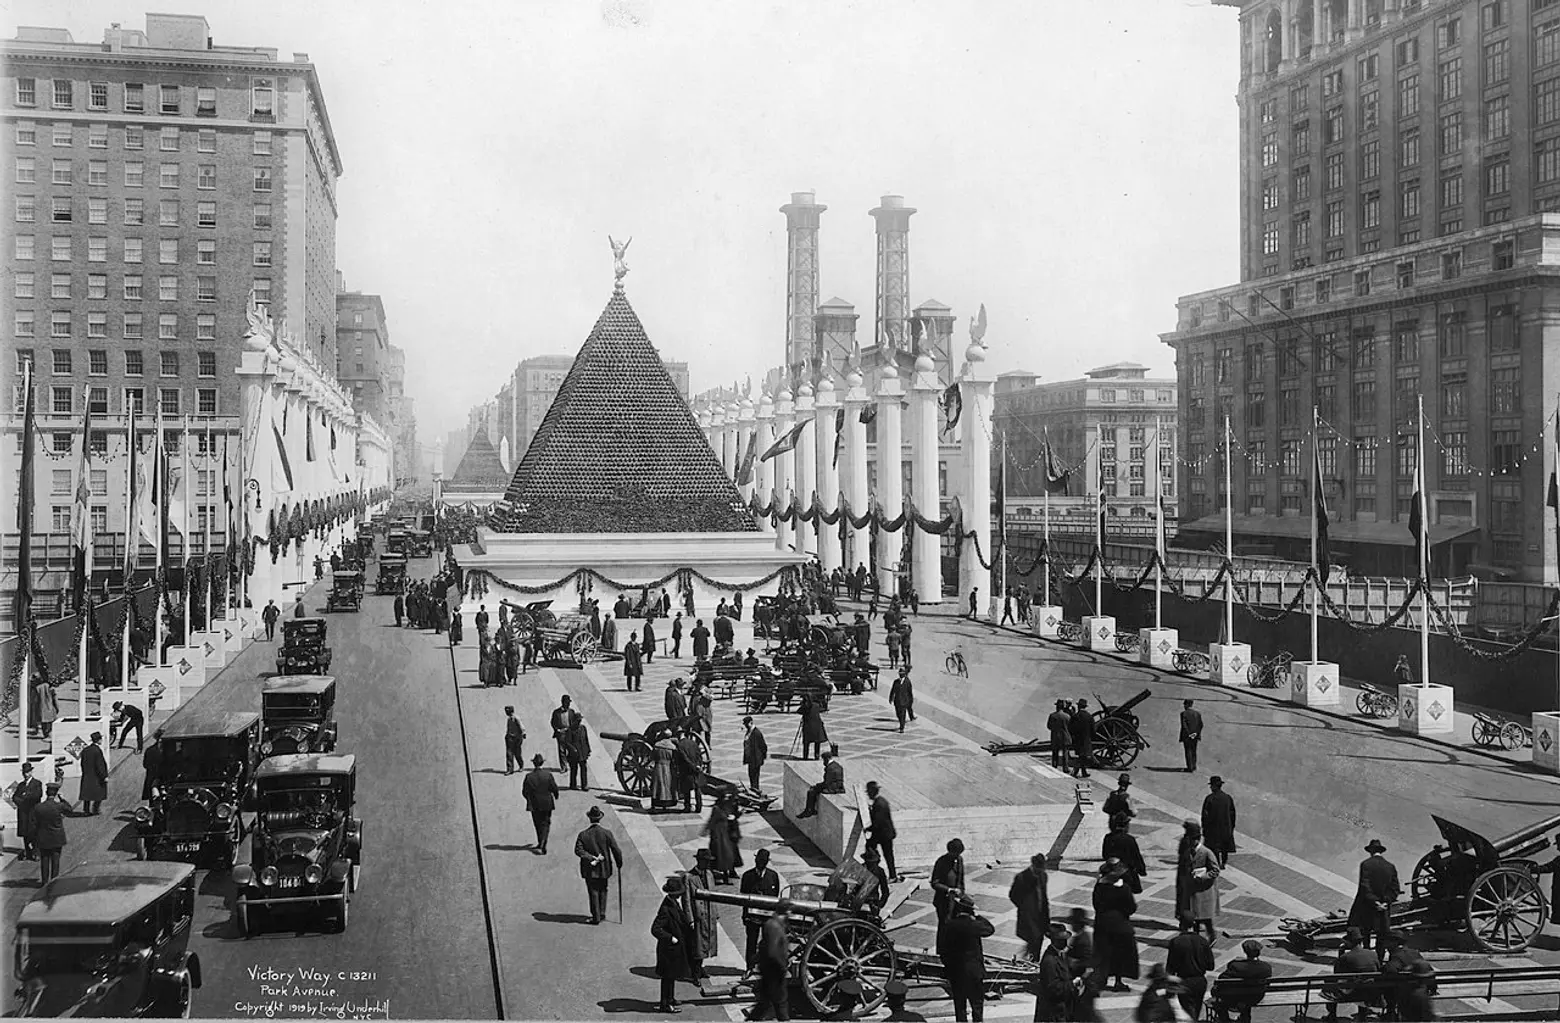 Photo From 1918 Shows a Towering Pyramid of 12,000 German Helmets in Front of Grand Central